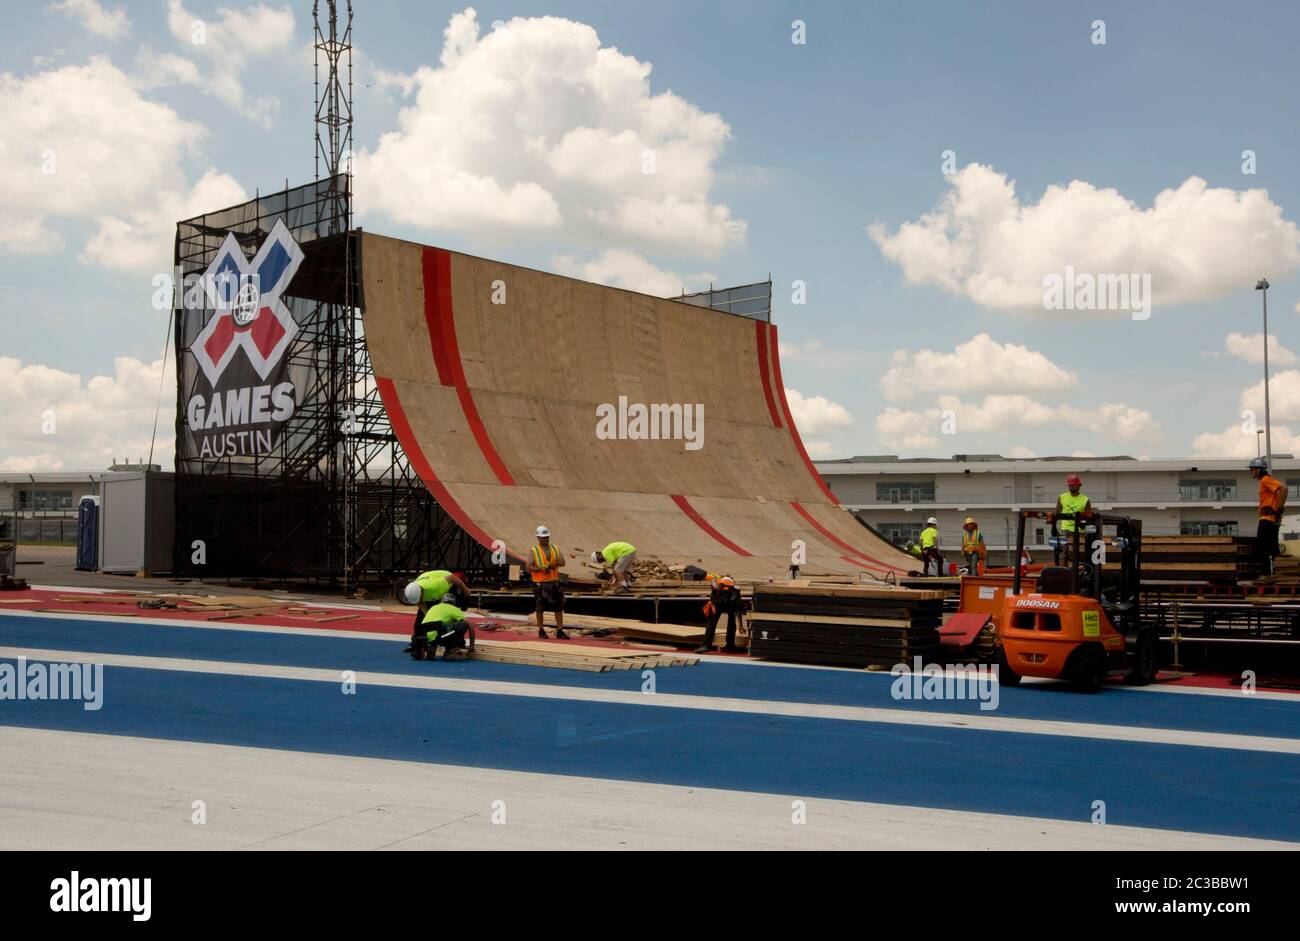 Austin Texas USA, May 29 2014: week before the annual X Games--a made-for-TV sports event--begin, workers hurry to finish construction on the Big Air ramp at the Circuit of the Americas motor sports venue. ©Marjorie Kamys Cotera/Daemmrich Photography Stock Photo